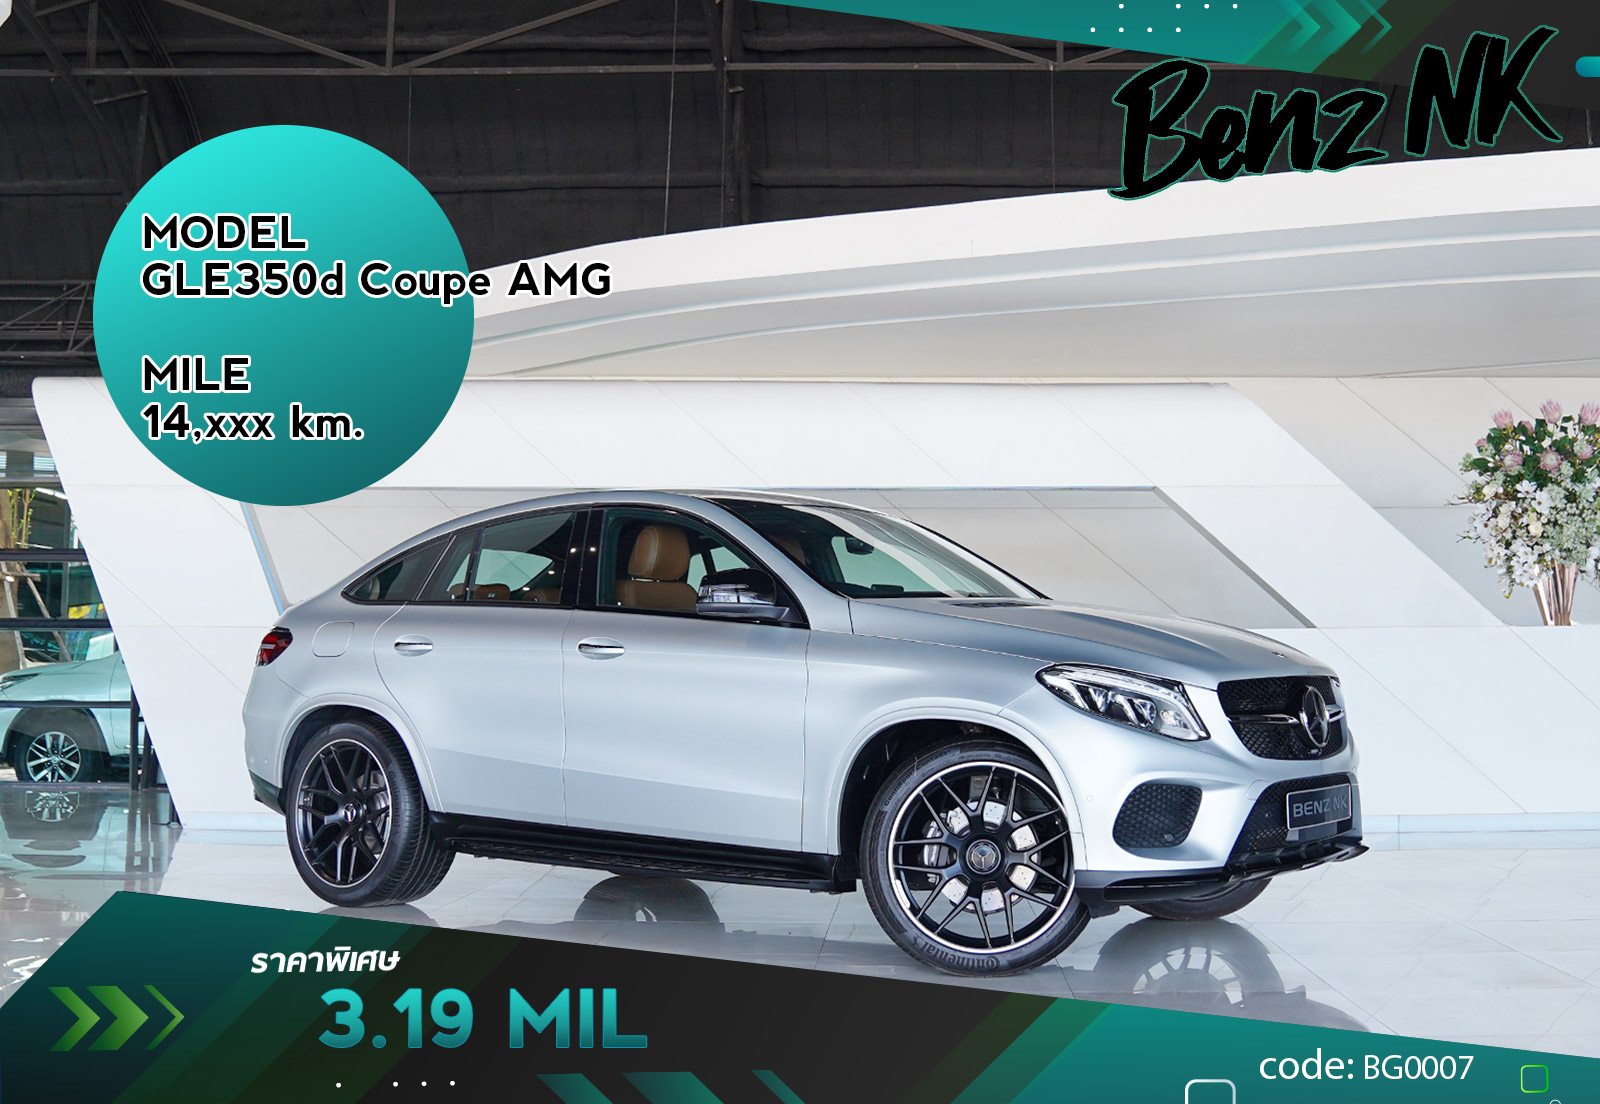 GLE350d Coupe AMG